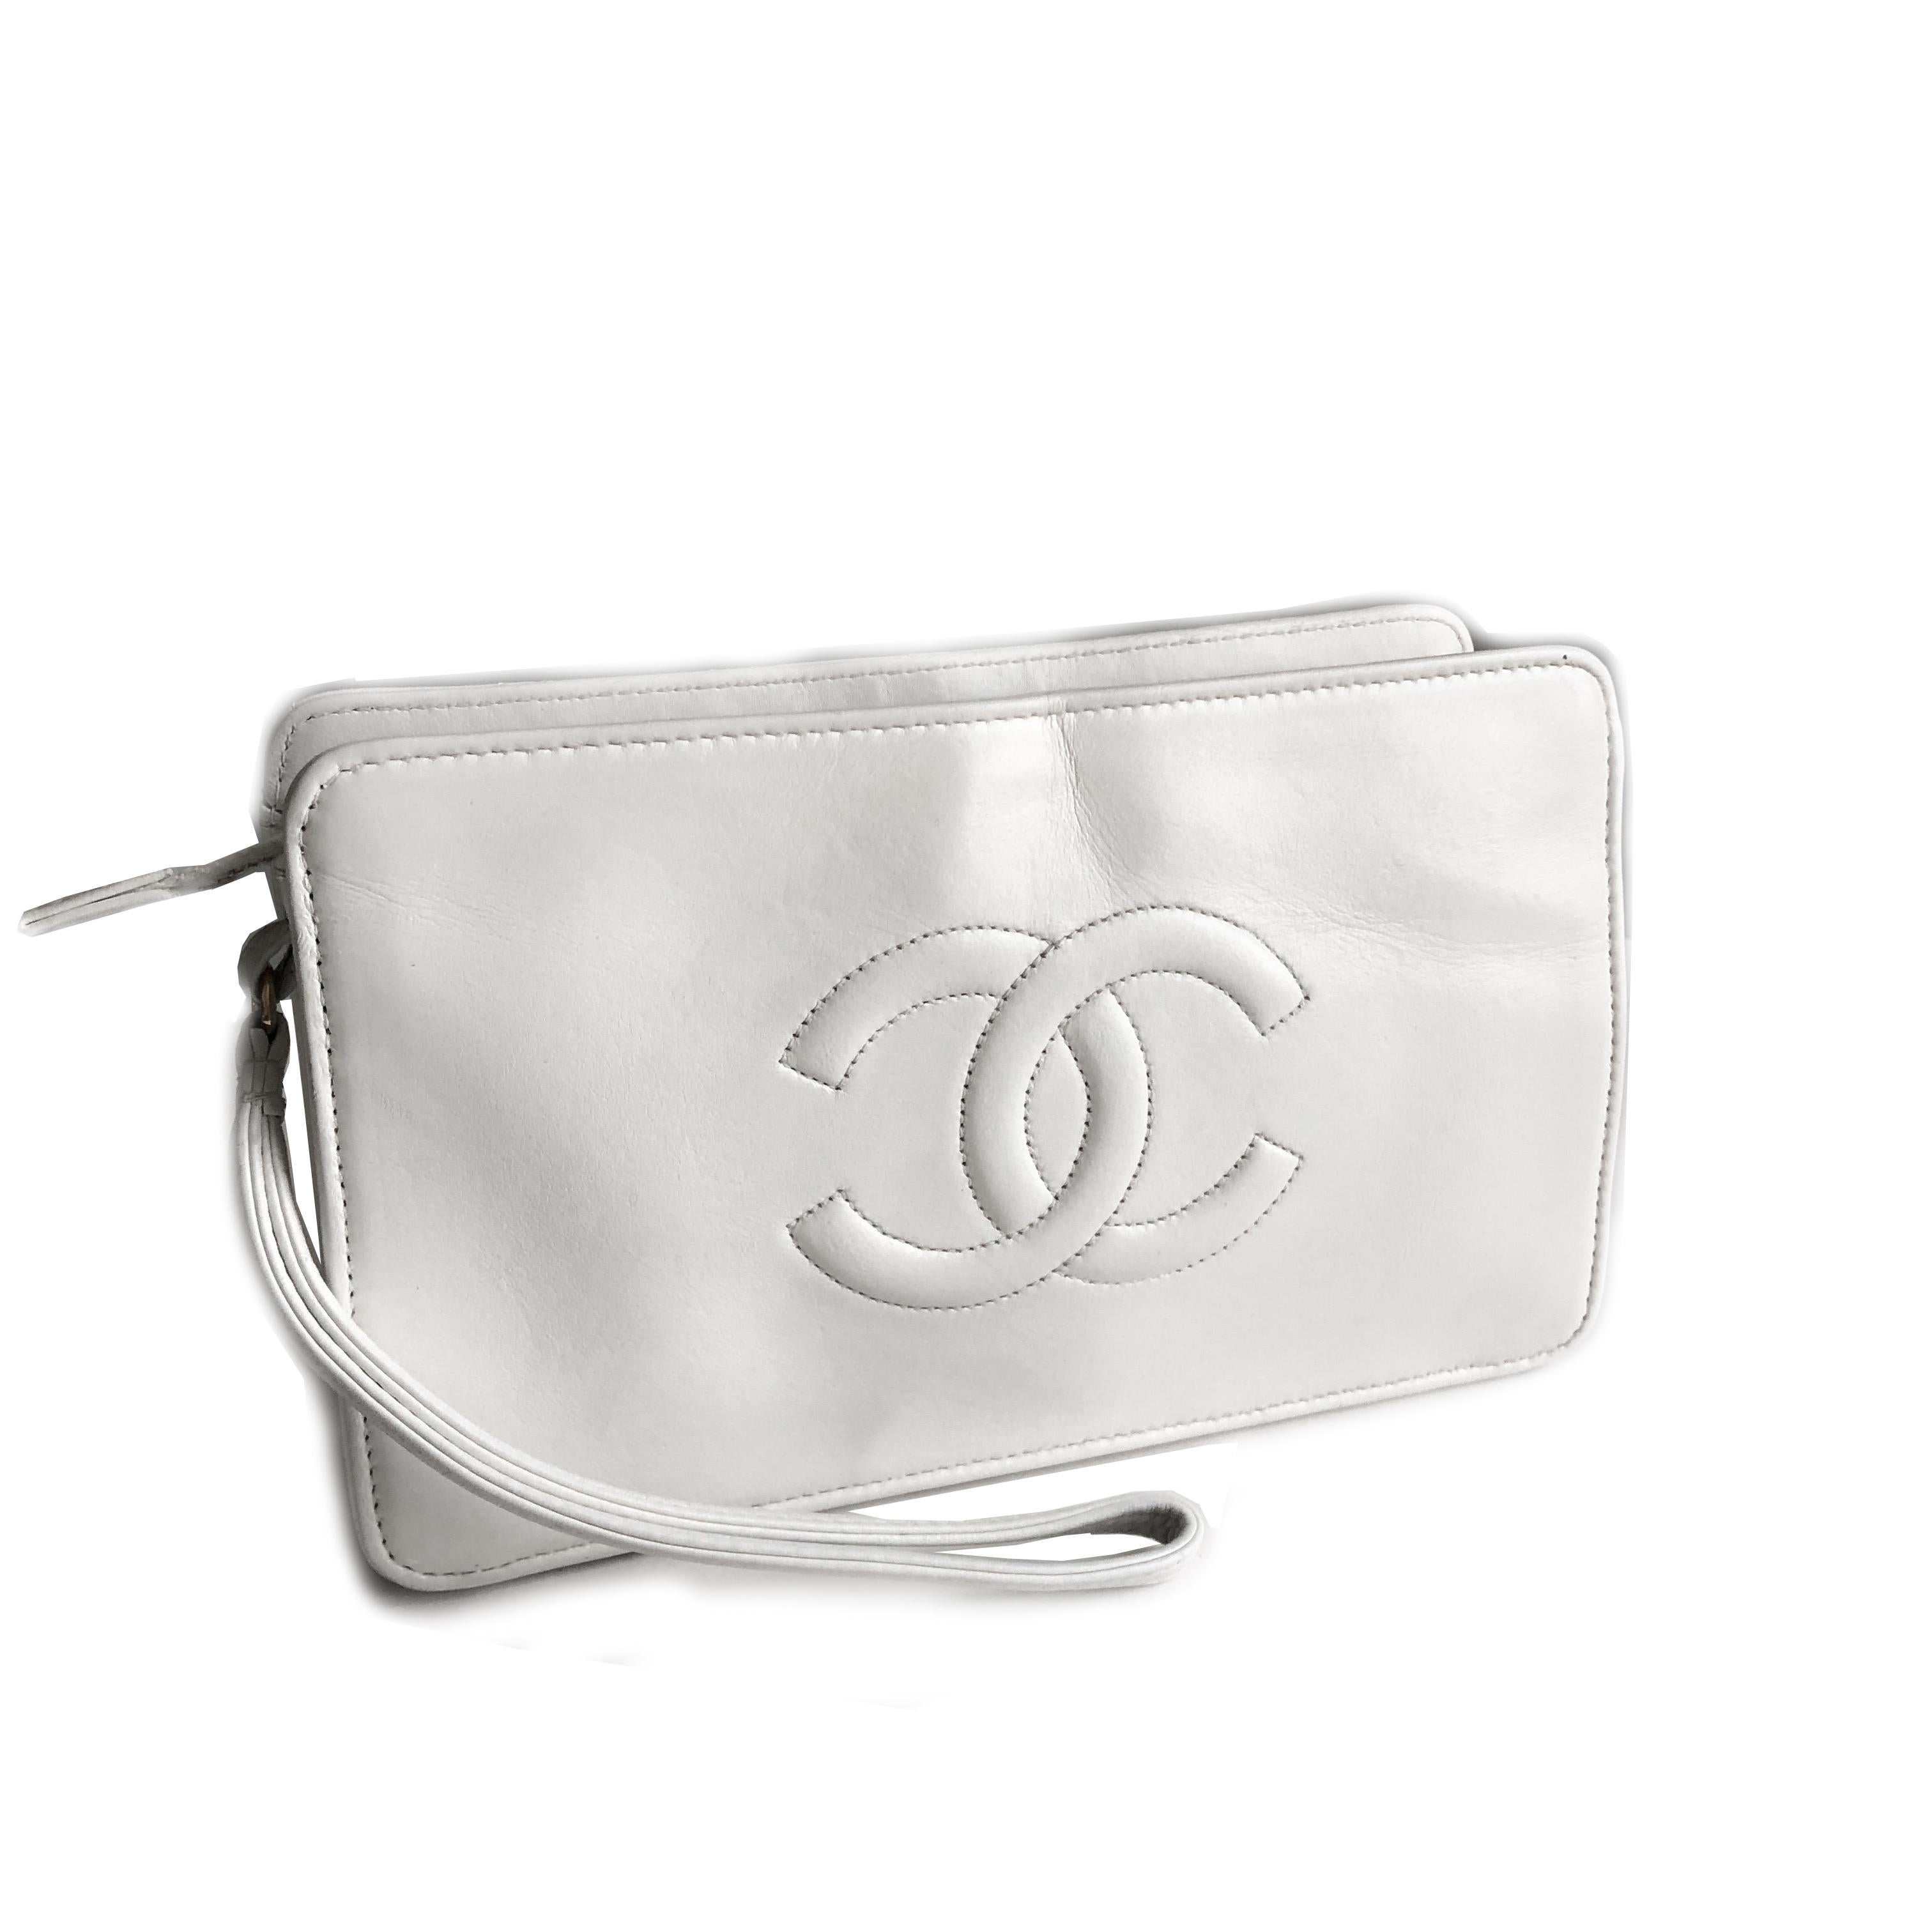 Authentic, preowned, vintage Chanel white leather CC logo clutch bag or wristlet, from the 90s. Matelasse quilting on one side/stitched CC logo on the other. Interior lined w/1 flat zip pocket. Gold metal hardware. Preowned/vintage w/minimal signs